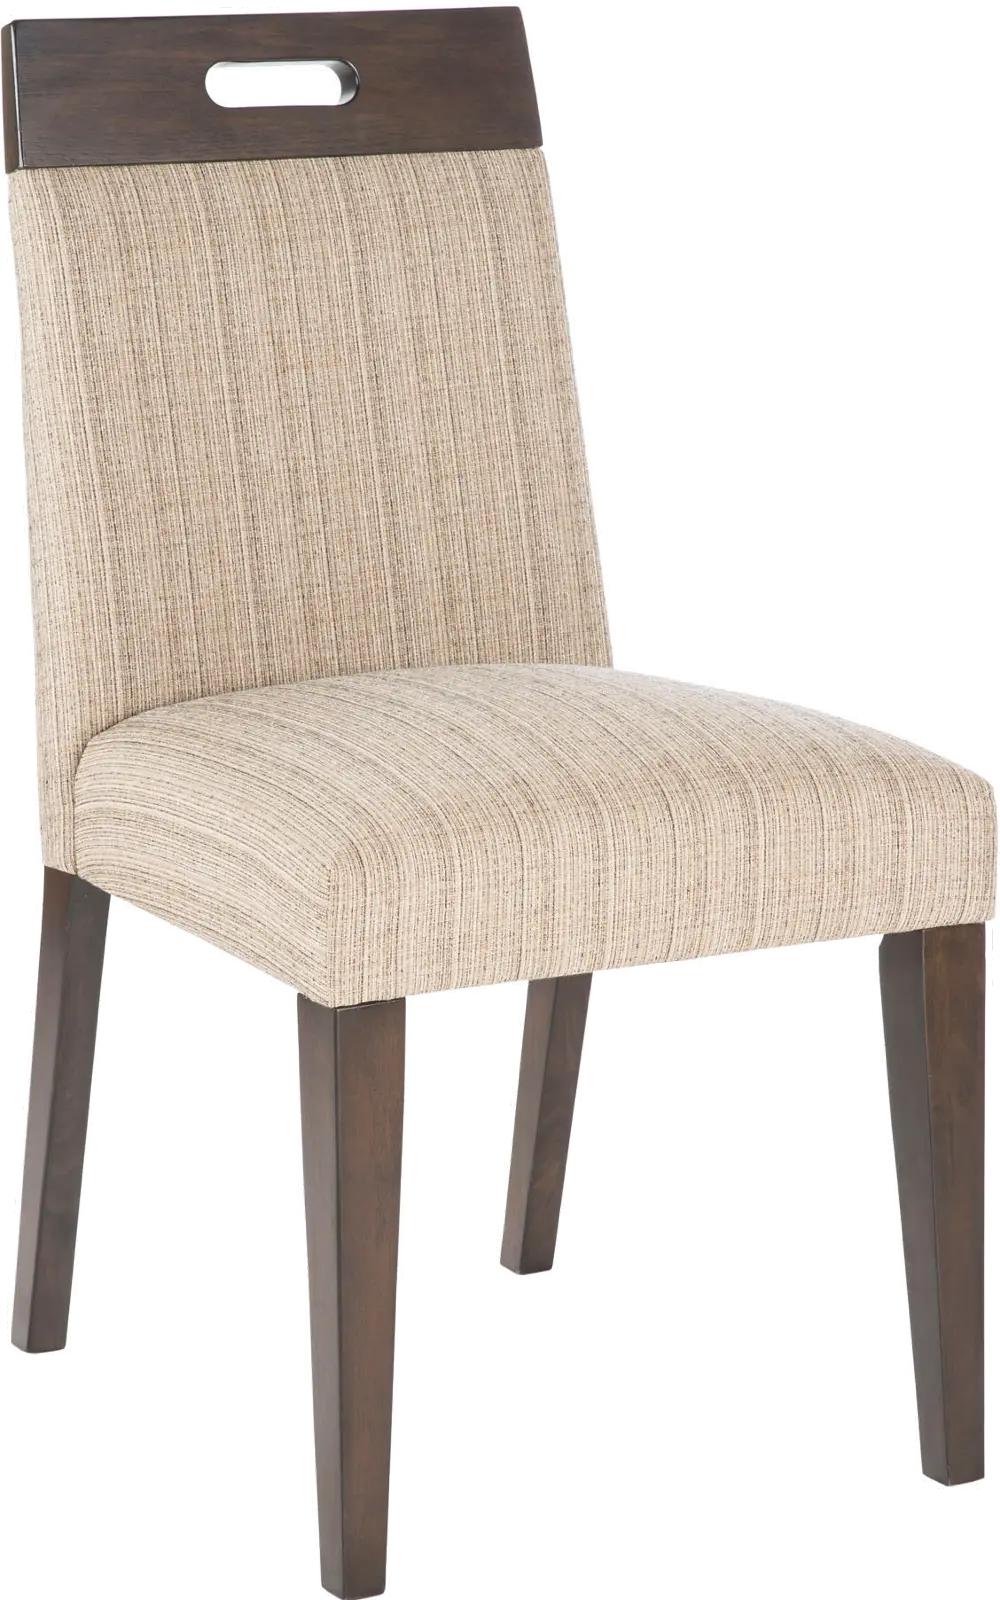 JAC-18/FPF20-0341 Raffia Upholstered Mid Century Modern Dining Room Chair - Ink+Ivy Jackson Collection-1